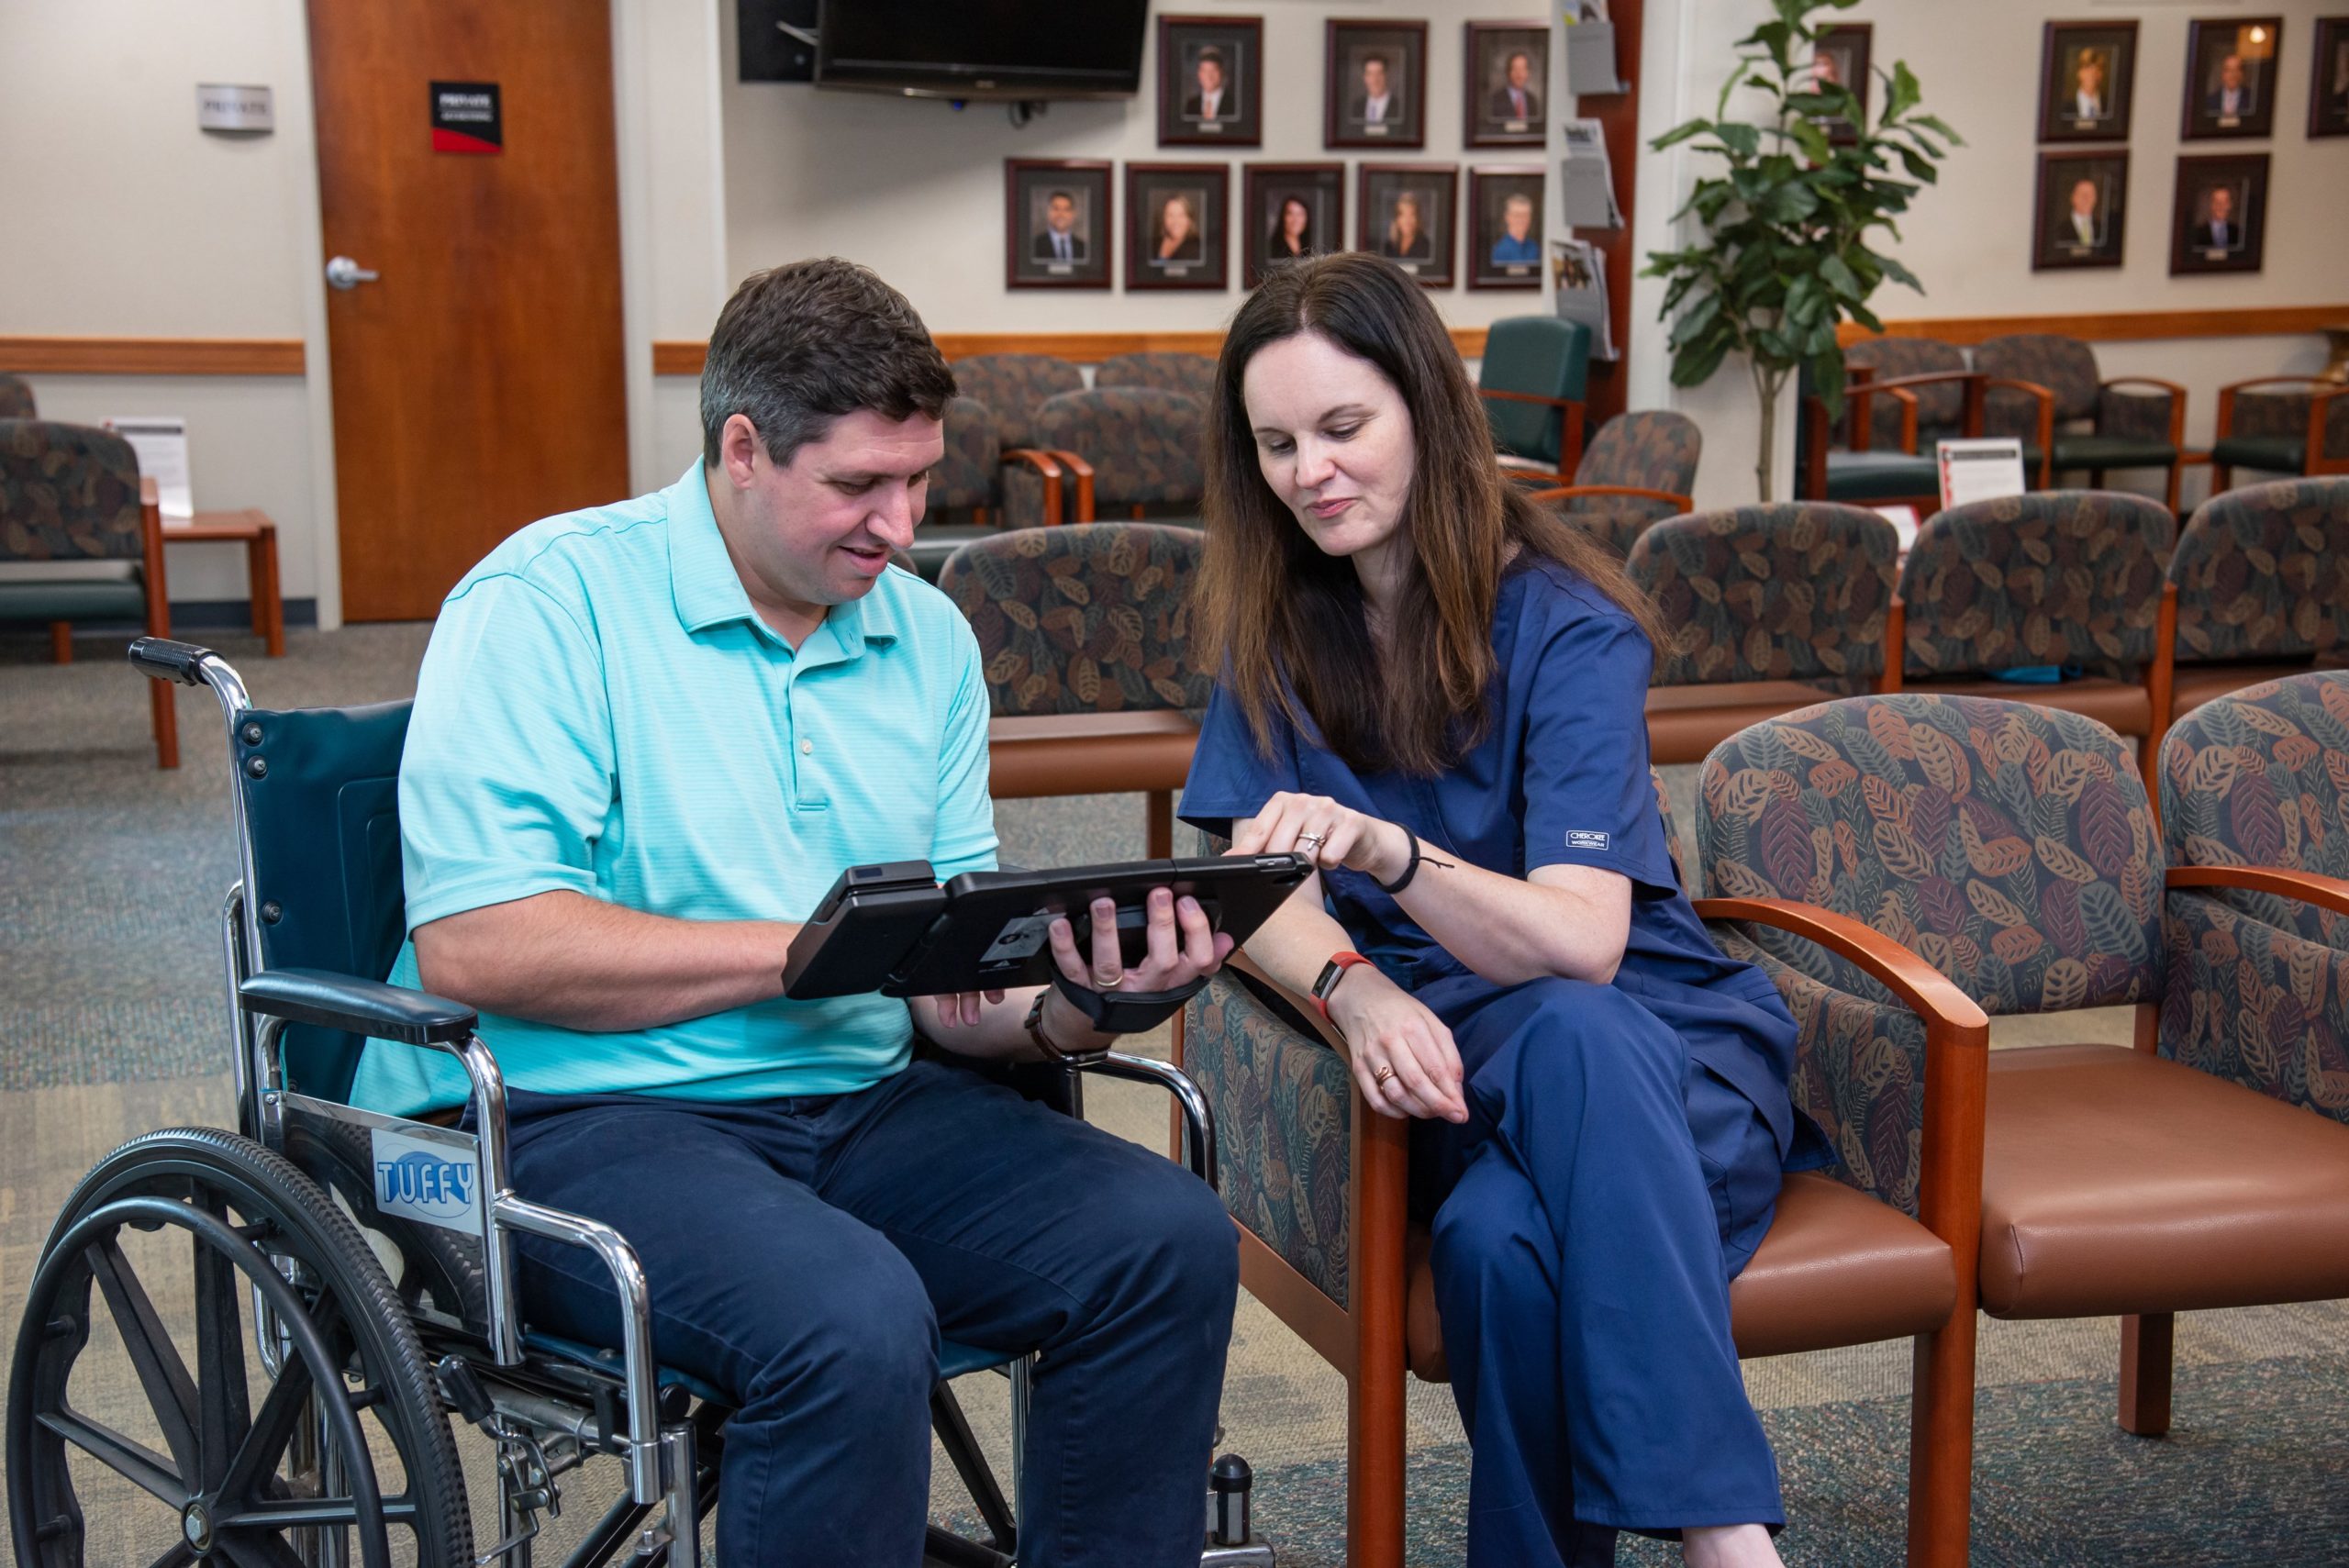 Nurse assisting patient in wheelchair using Clearwave Self Check-In Tablet